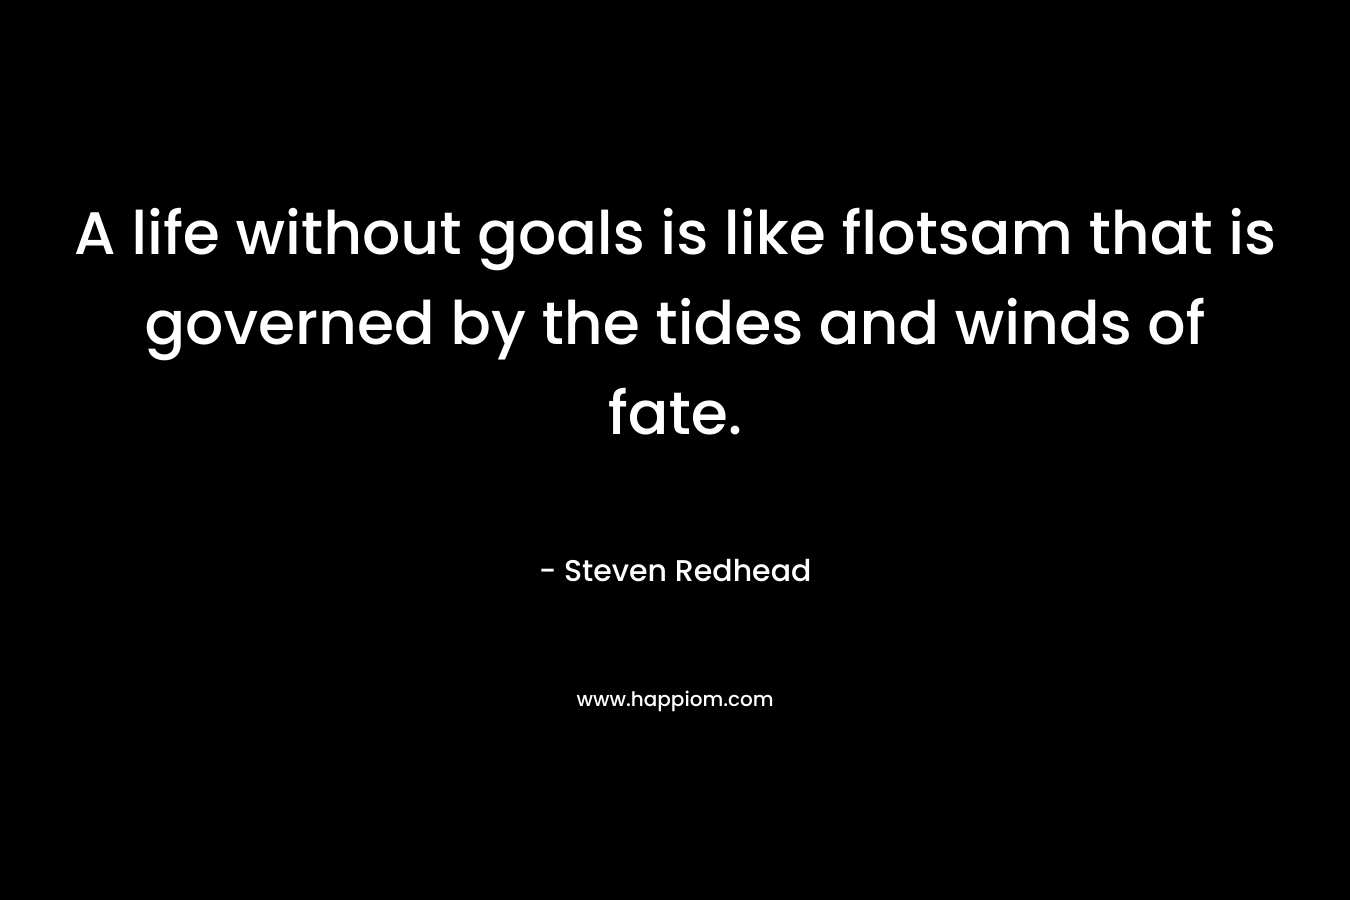 A life without goals is like flotsam that is governed by the tides and winds of fate.